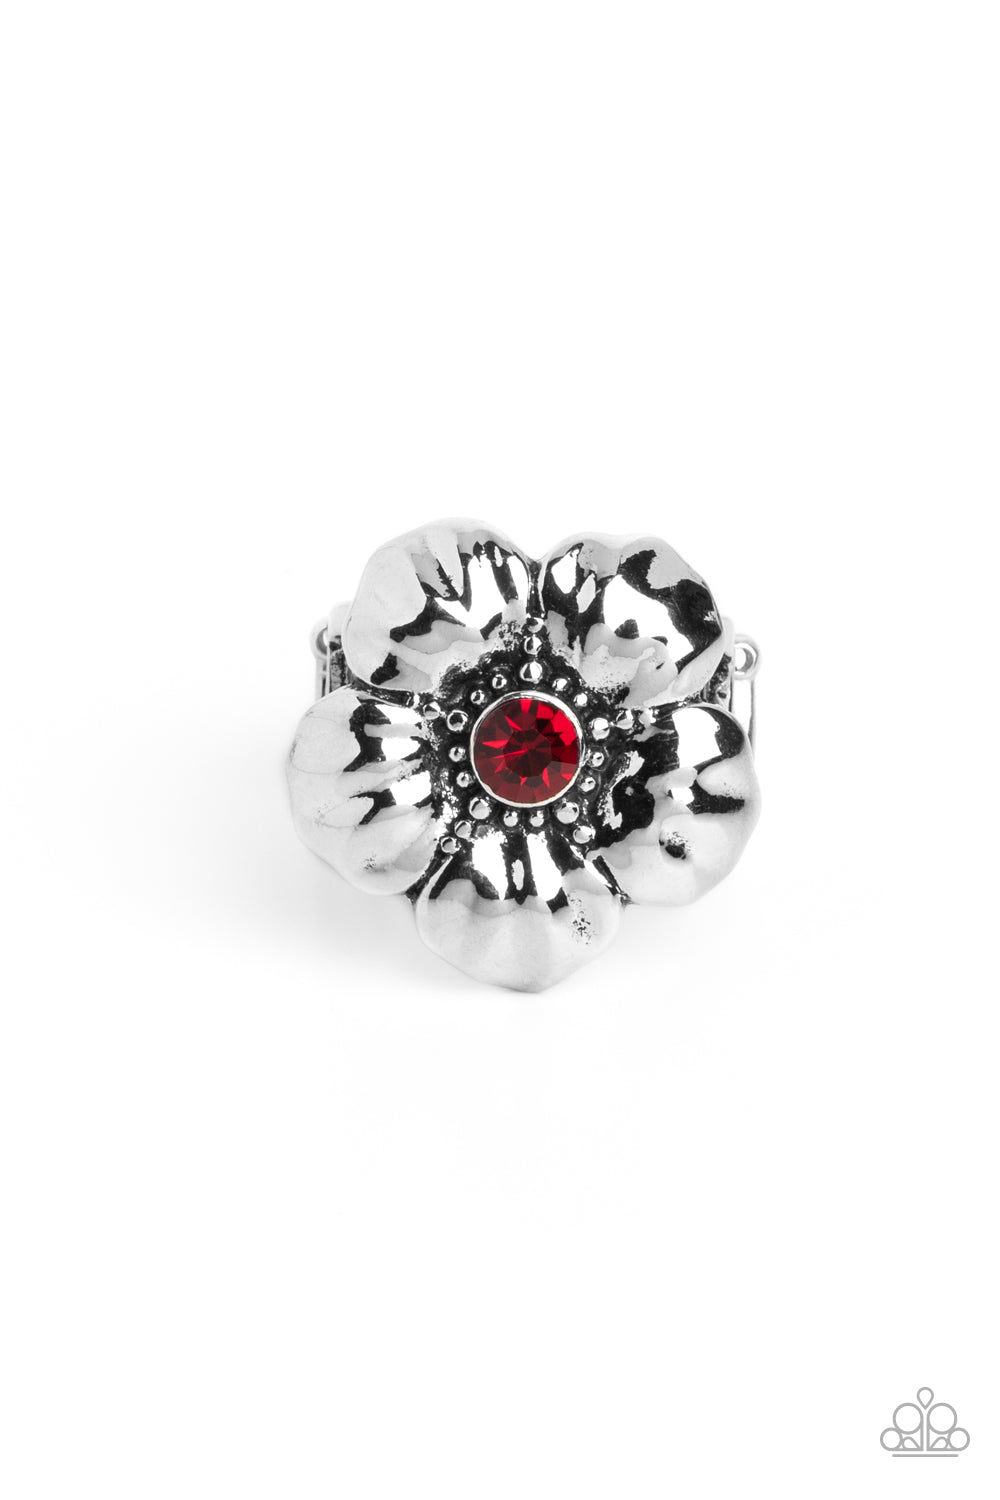 BLOOM BLOOM Pow - red - Paparazzi ring